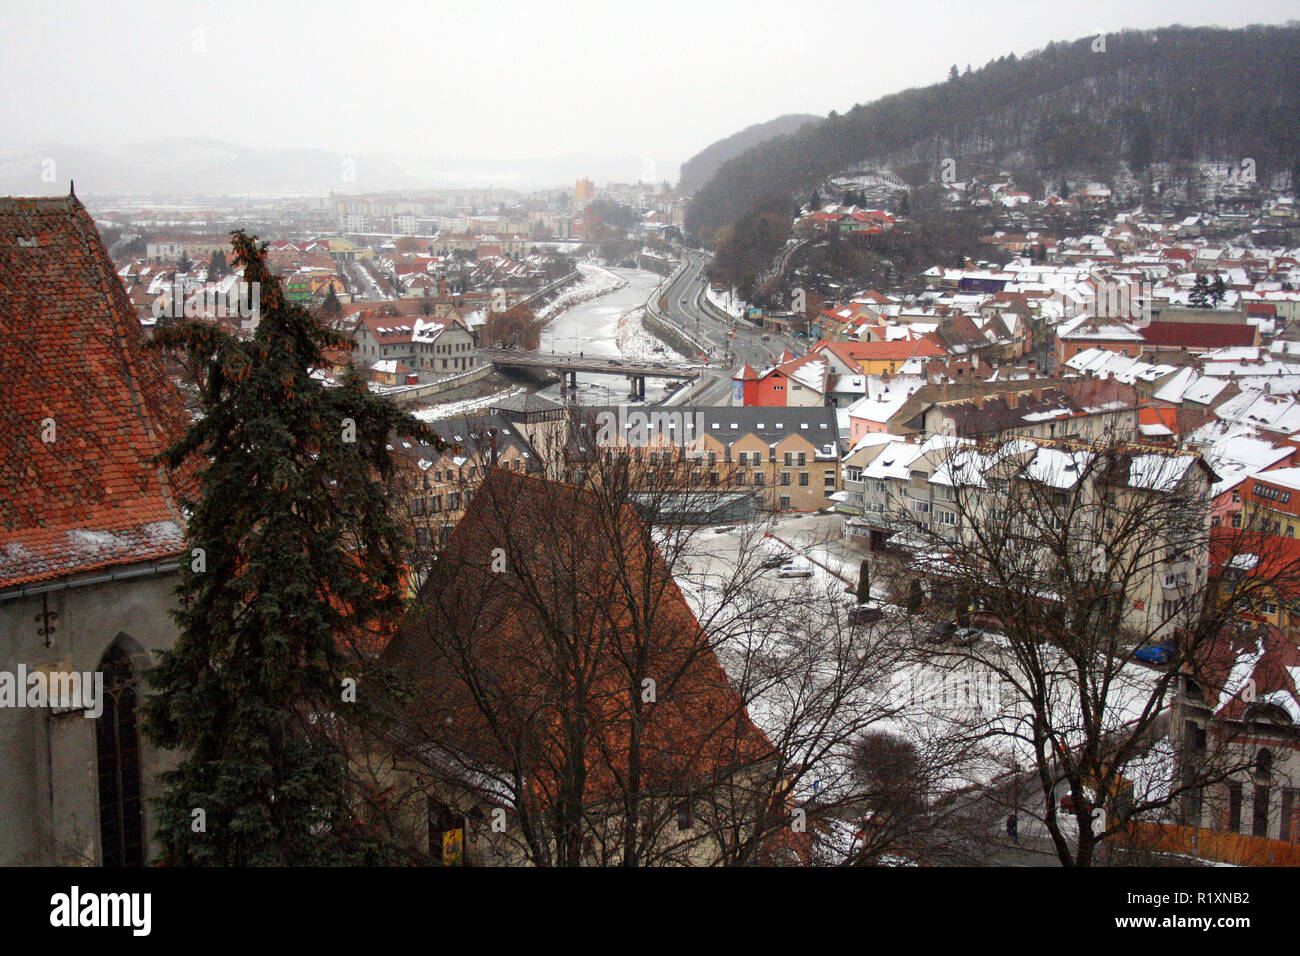 Birdseye view of Sighisoara in winter as seen from top of its medieval clock tower, Sighisoara, Romania Stock Photo